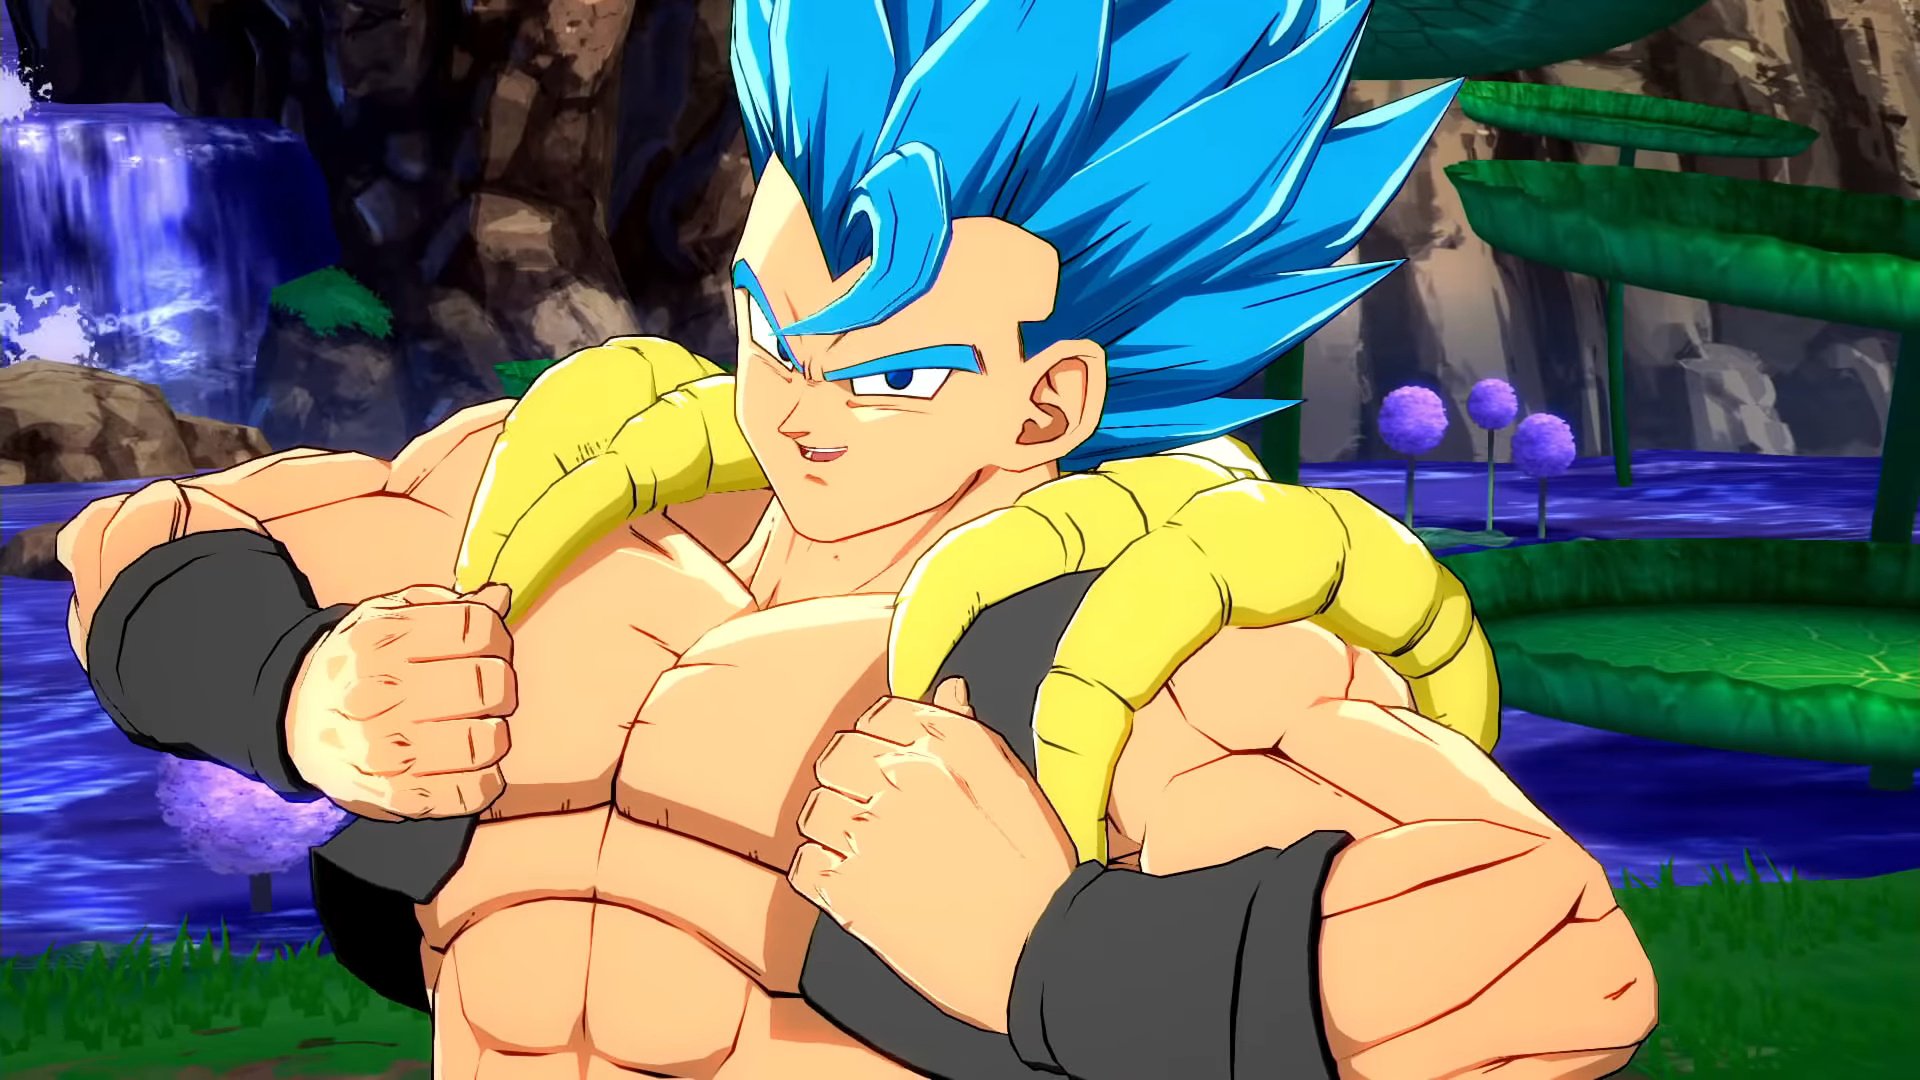 Gogeta The Powerful Fusion Warrior Joins The Battle In Dragon Ball FighterZ - Nintendo Life